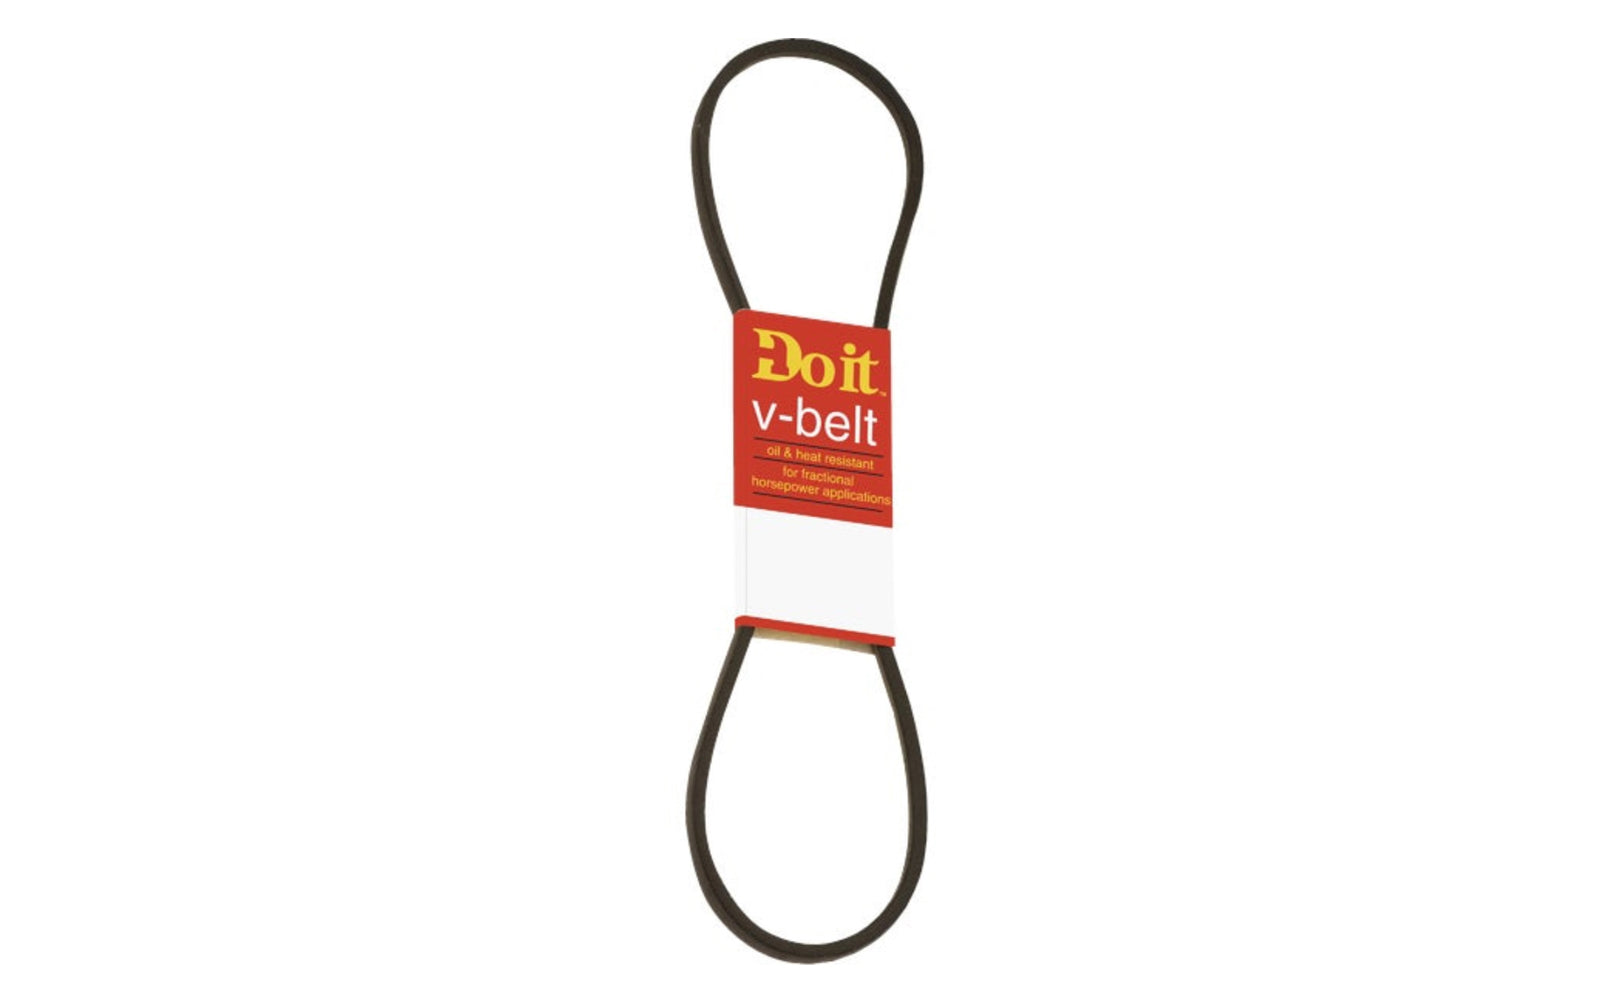 28" Long x 1/2" Width V-Belt - 4L280. Rubber V-Belt. Oil & heat resistant. Recommended for 1-3 HP (horsepower) light-duty applications. Typically the best option for electric powered applications. For refrigerators, washing machines, pumps, stokers, woodworking machines. Pulley type: A-Pulley.